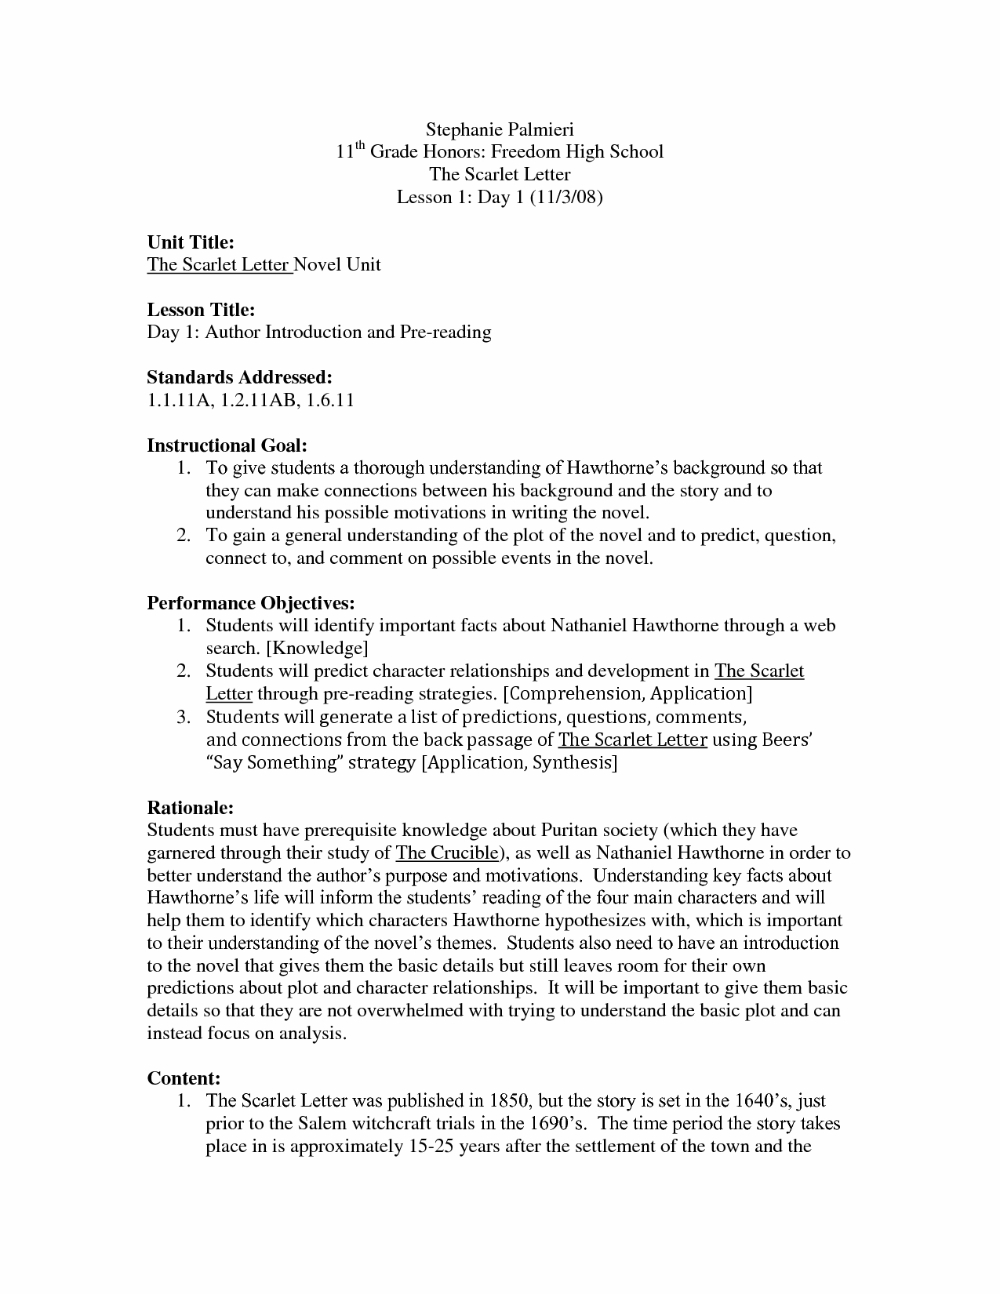 Recommendation Letter Template To A Judge Ten Great Nyfamily inside sizing 1000 X 1294